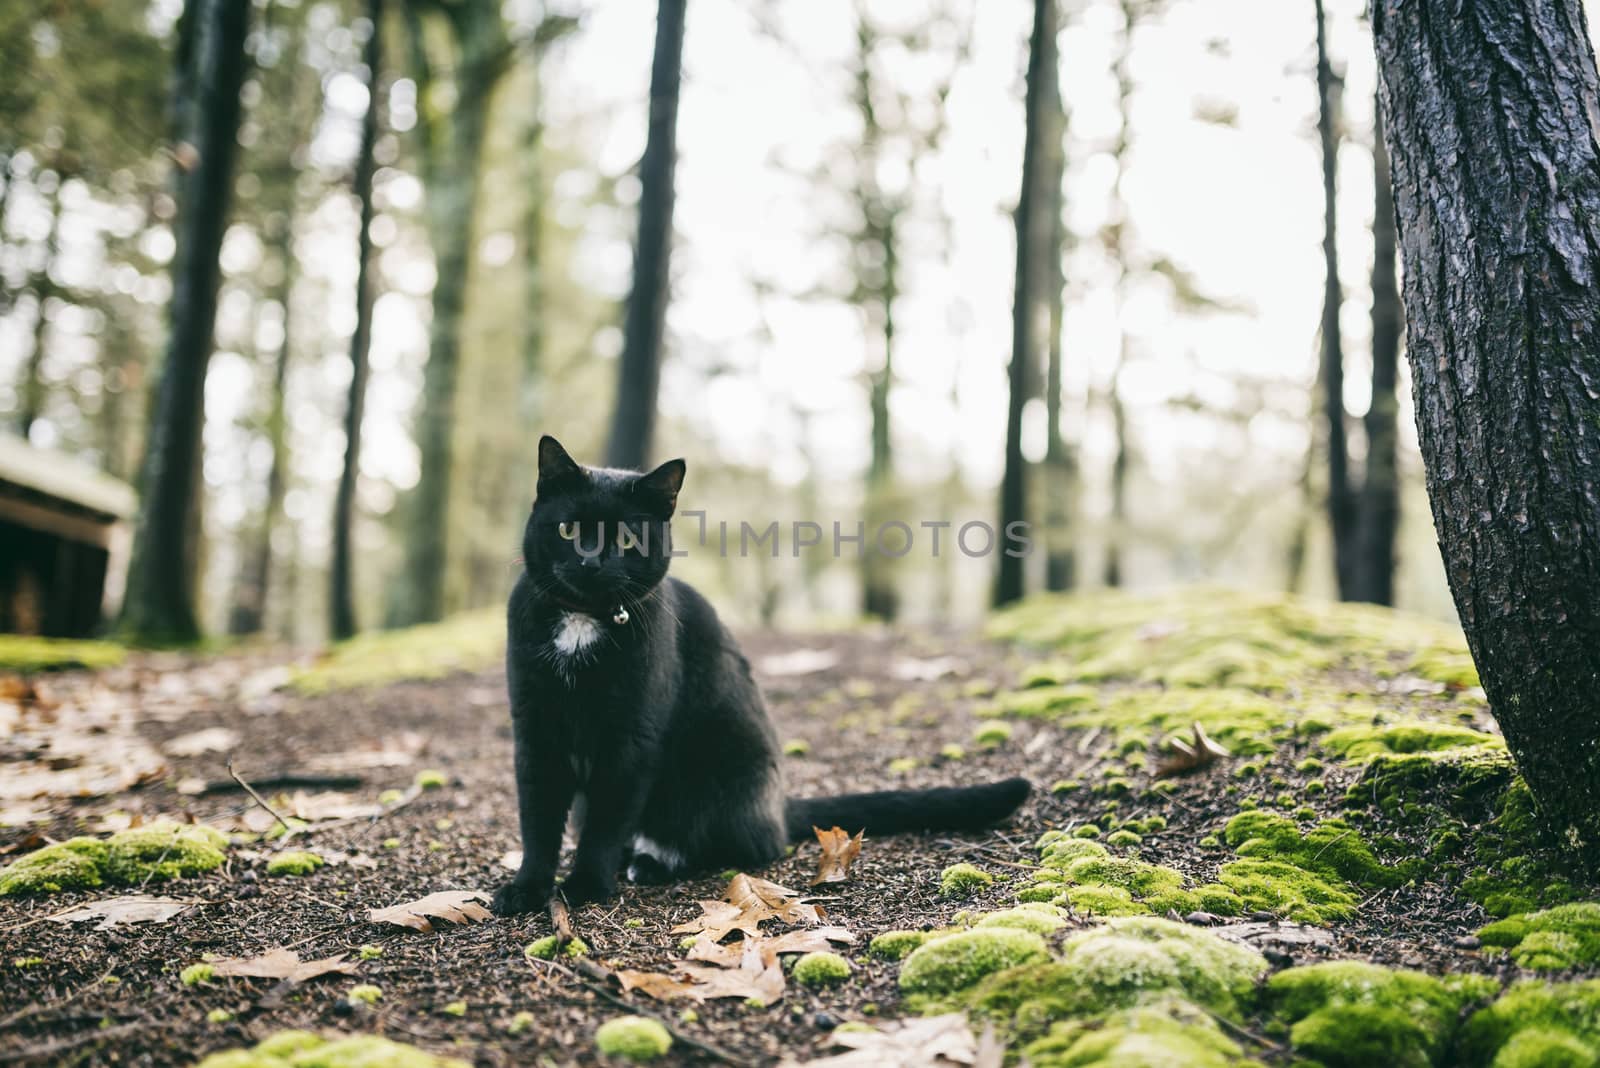 Black cat sitting in a green lush forest